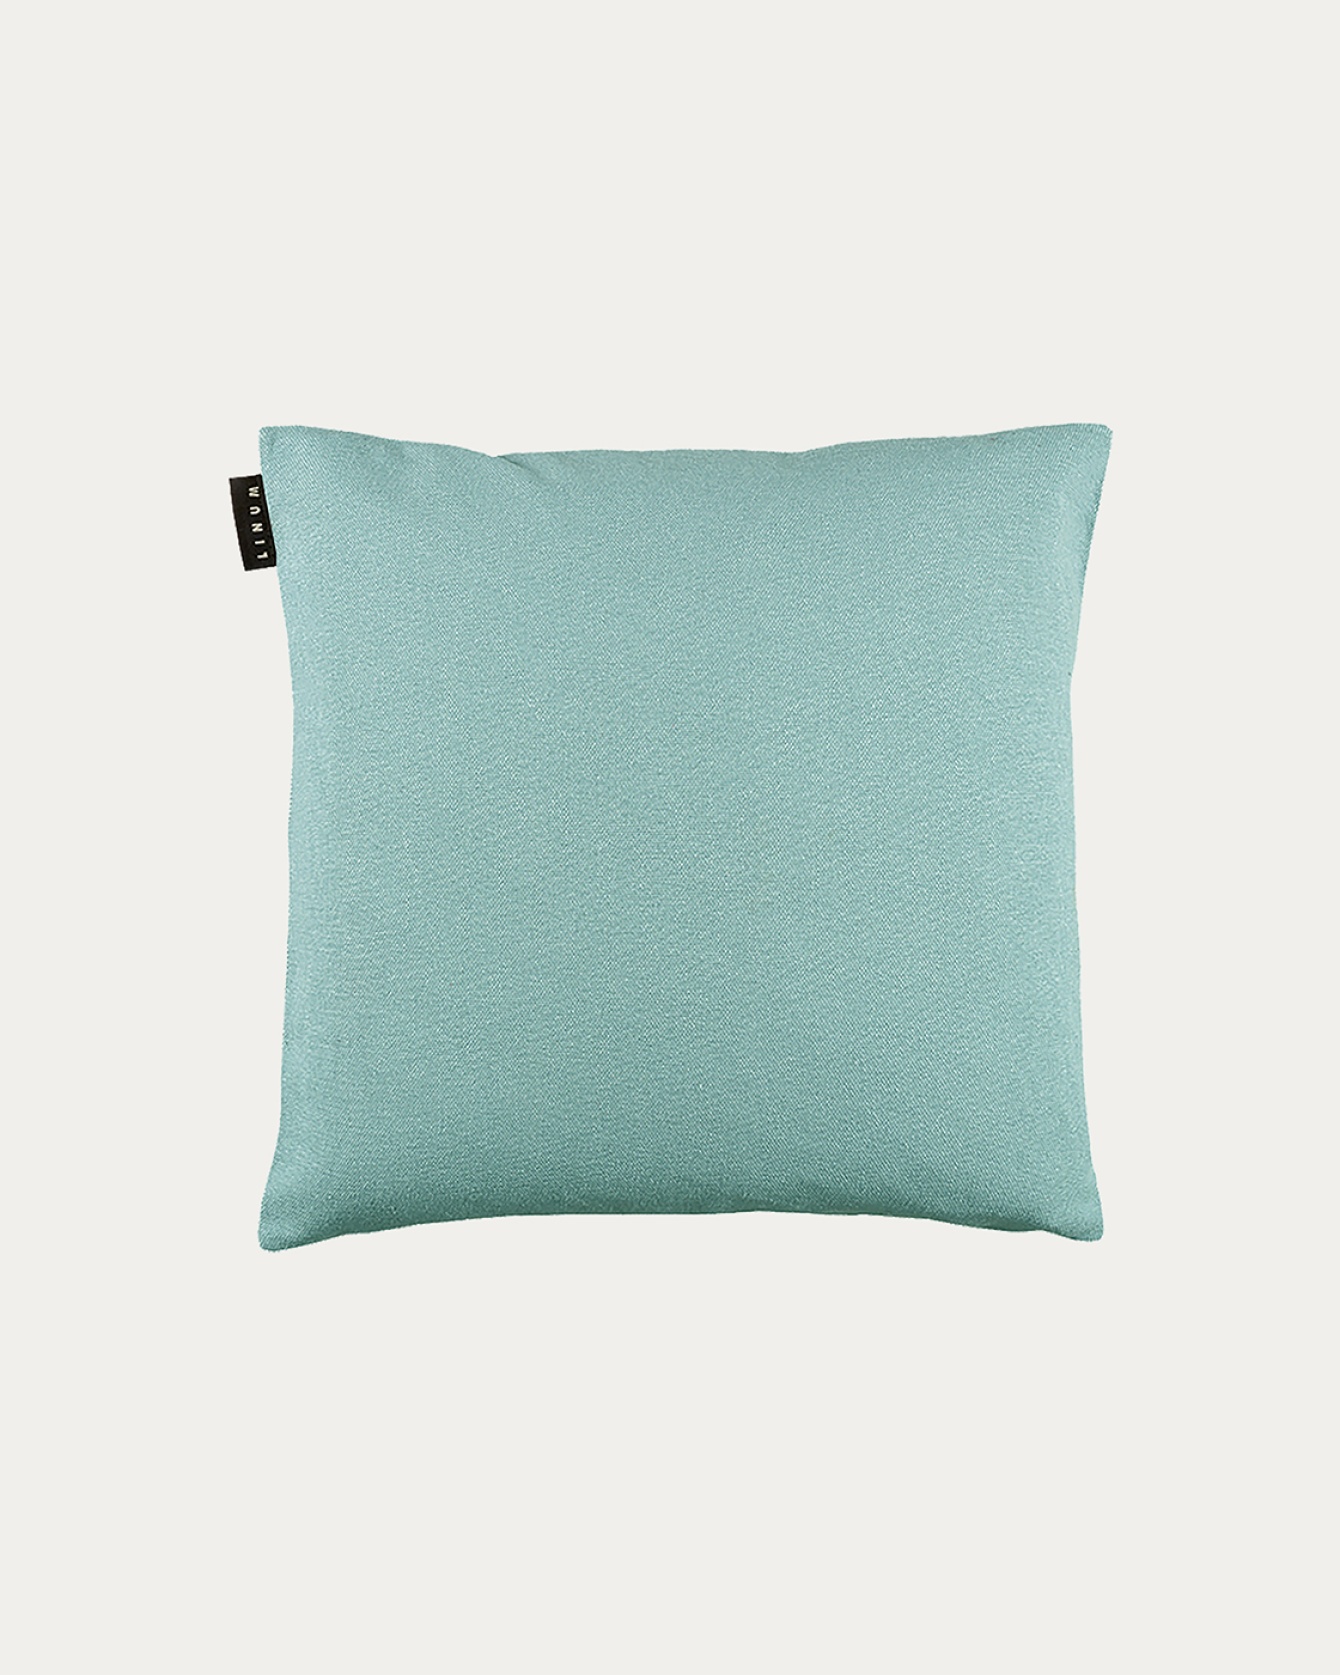 PEPPER Cushion cover 40x40 cm Dusty turquoise